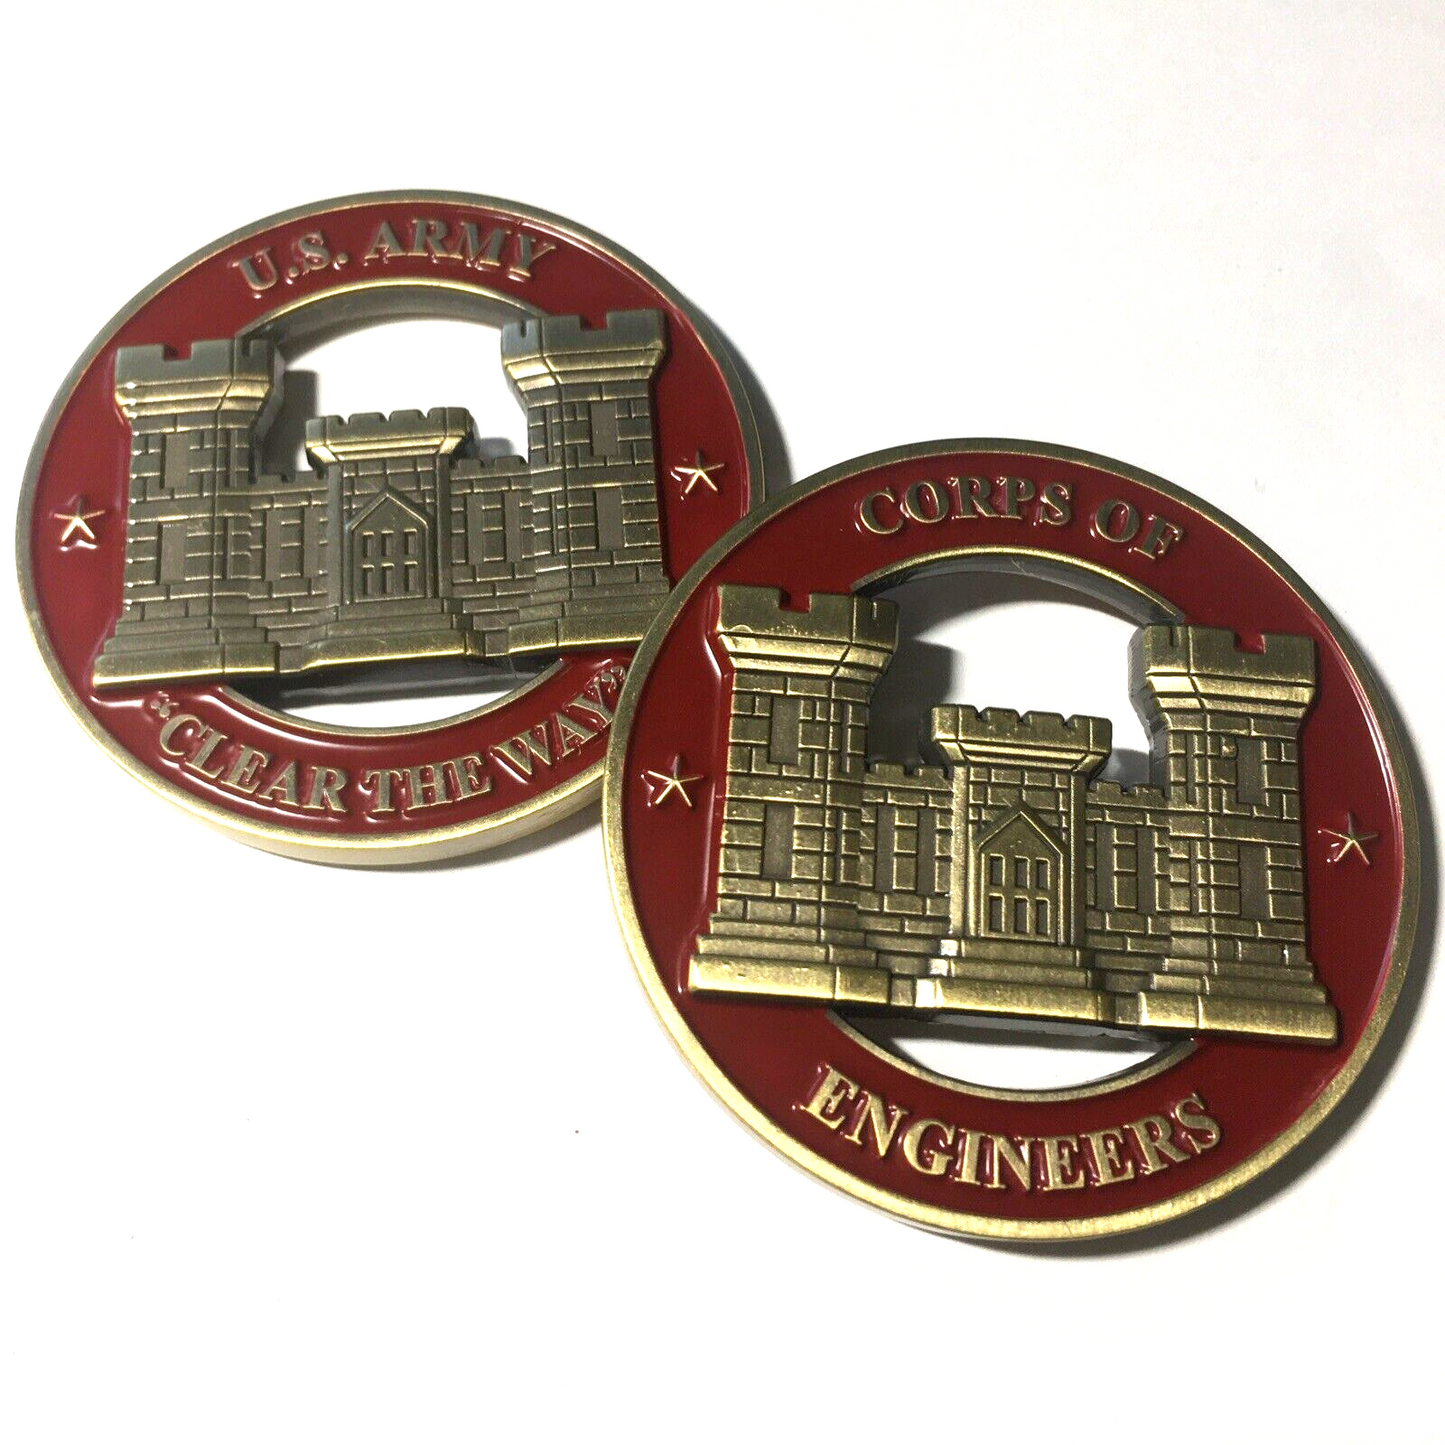 DROP SHIP US ARMY Corps of Engineers High Grade "Clear The Way" Challenge Coin